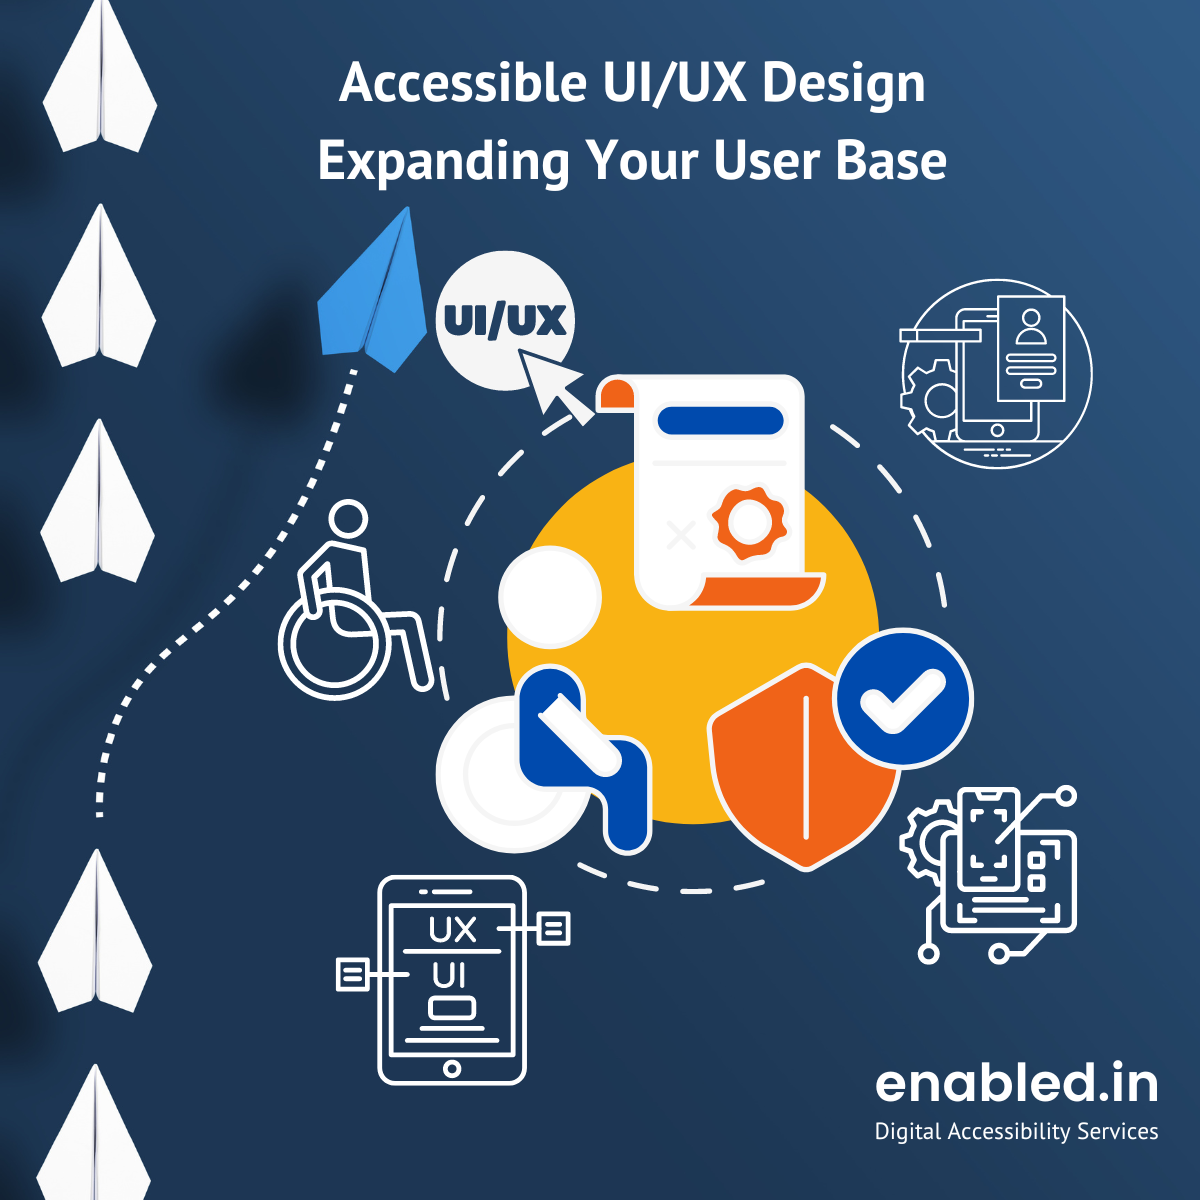 Accessible UI/UX Design – Expanding Your User Base